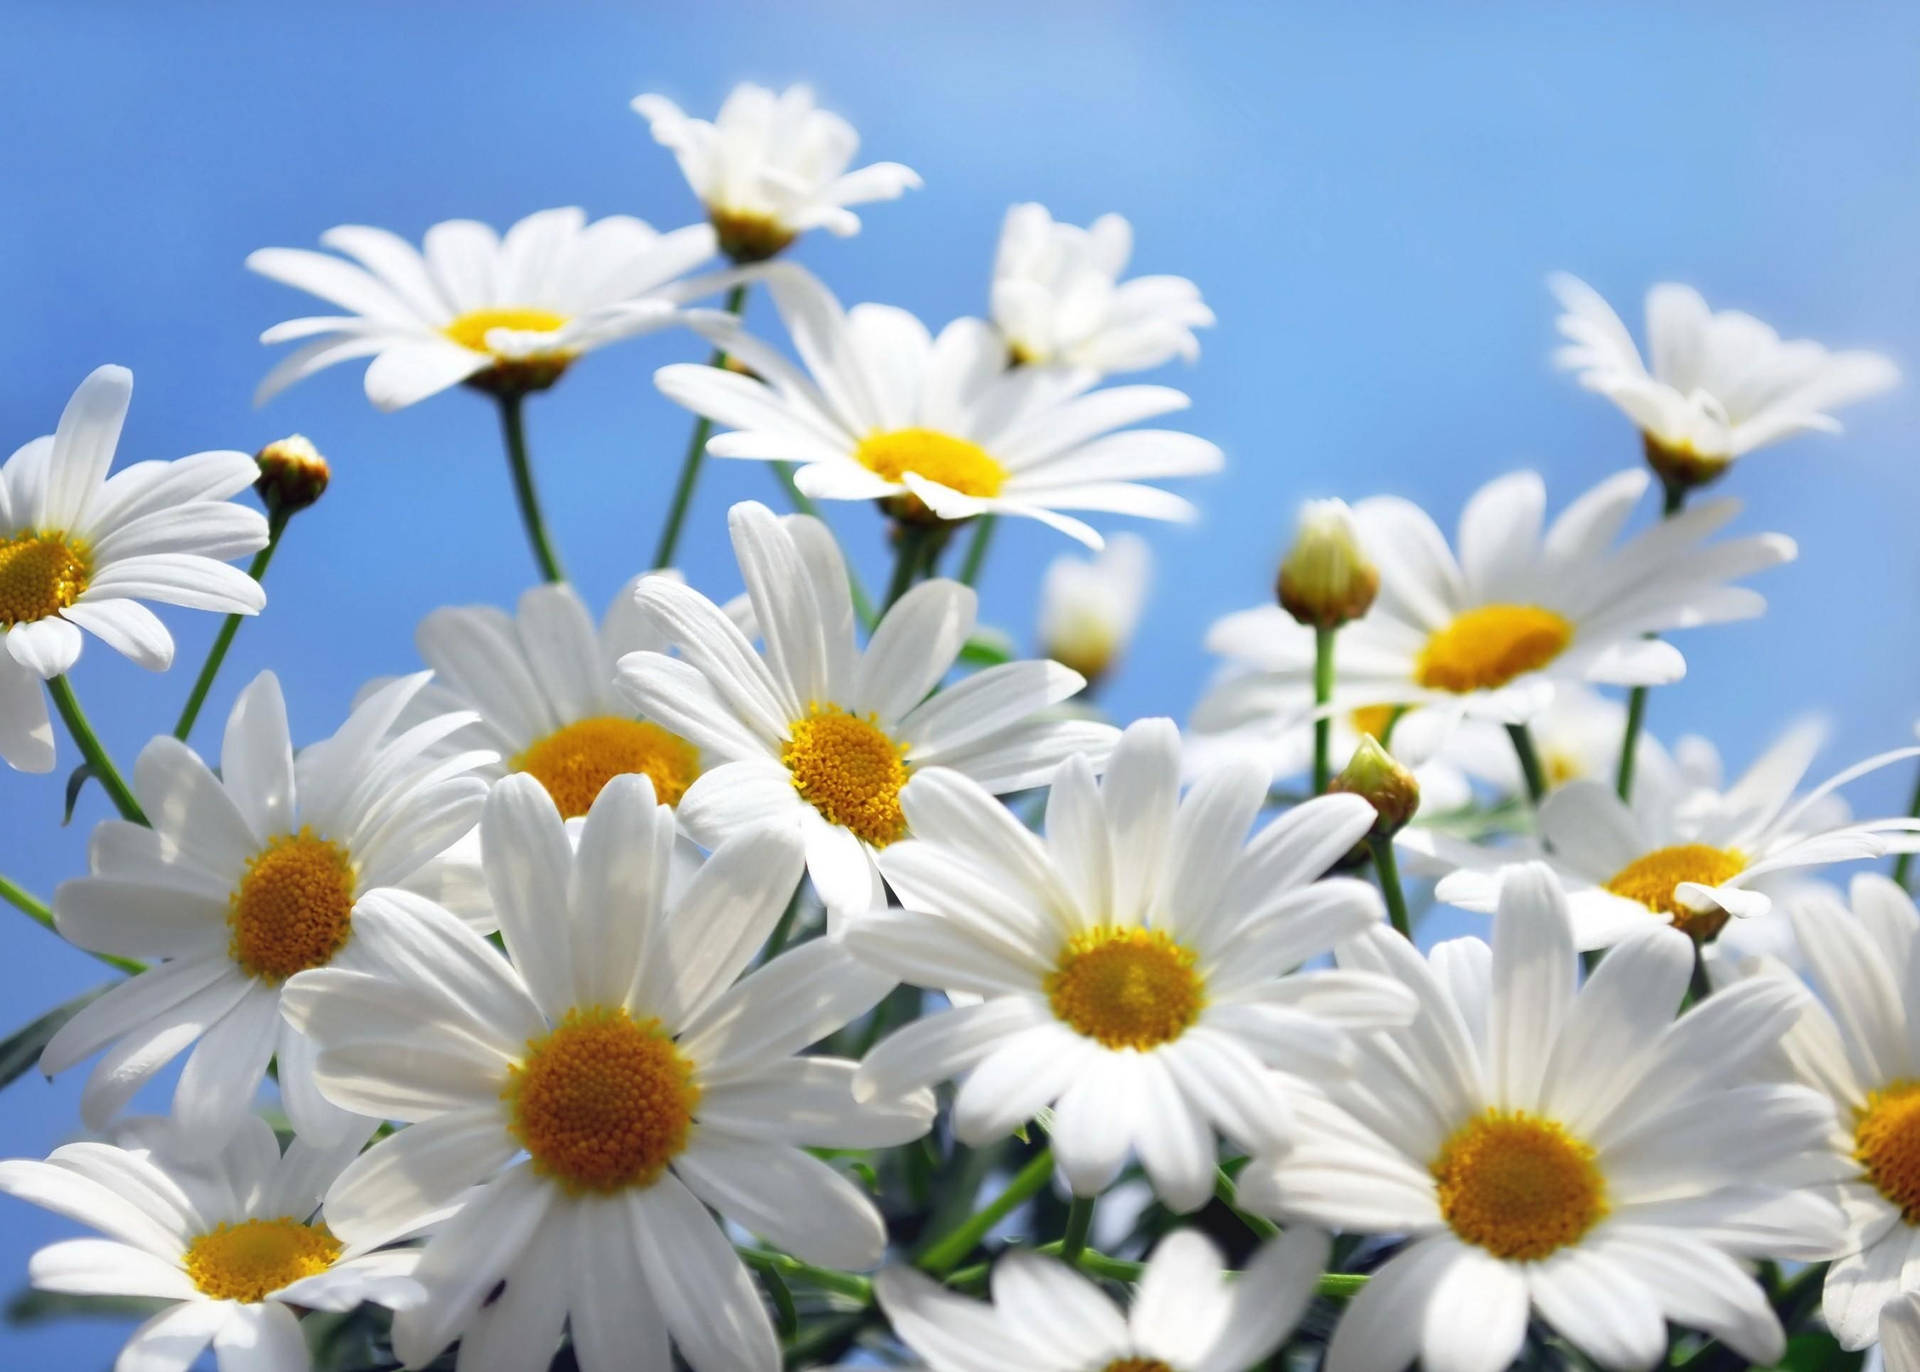 Blooming Daisies 4k Background